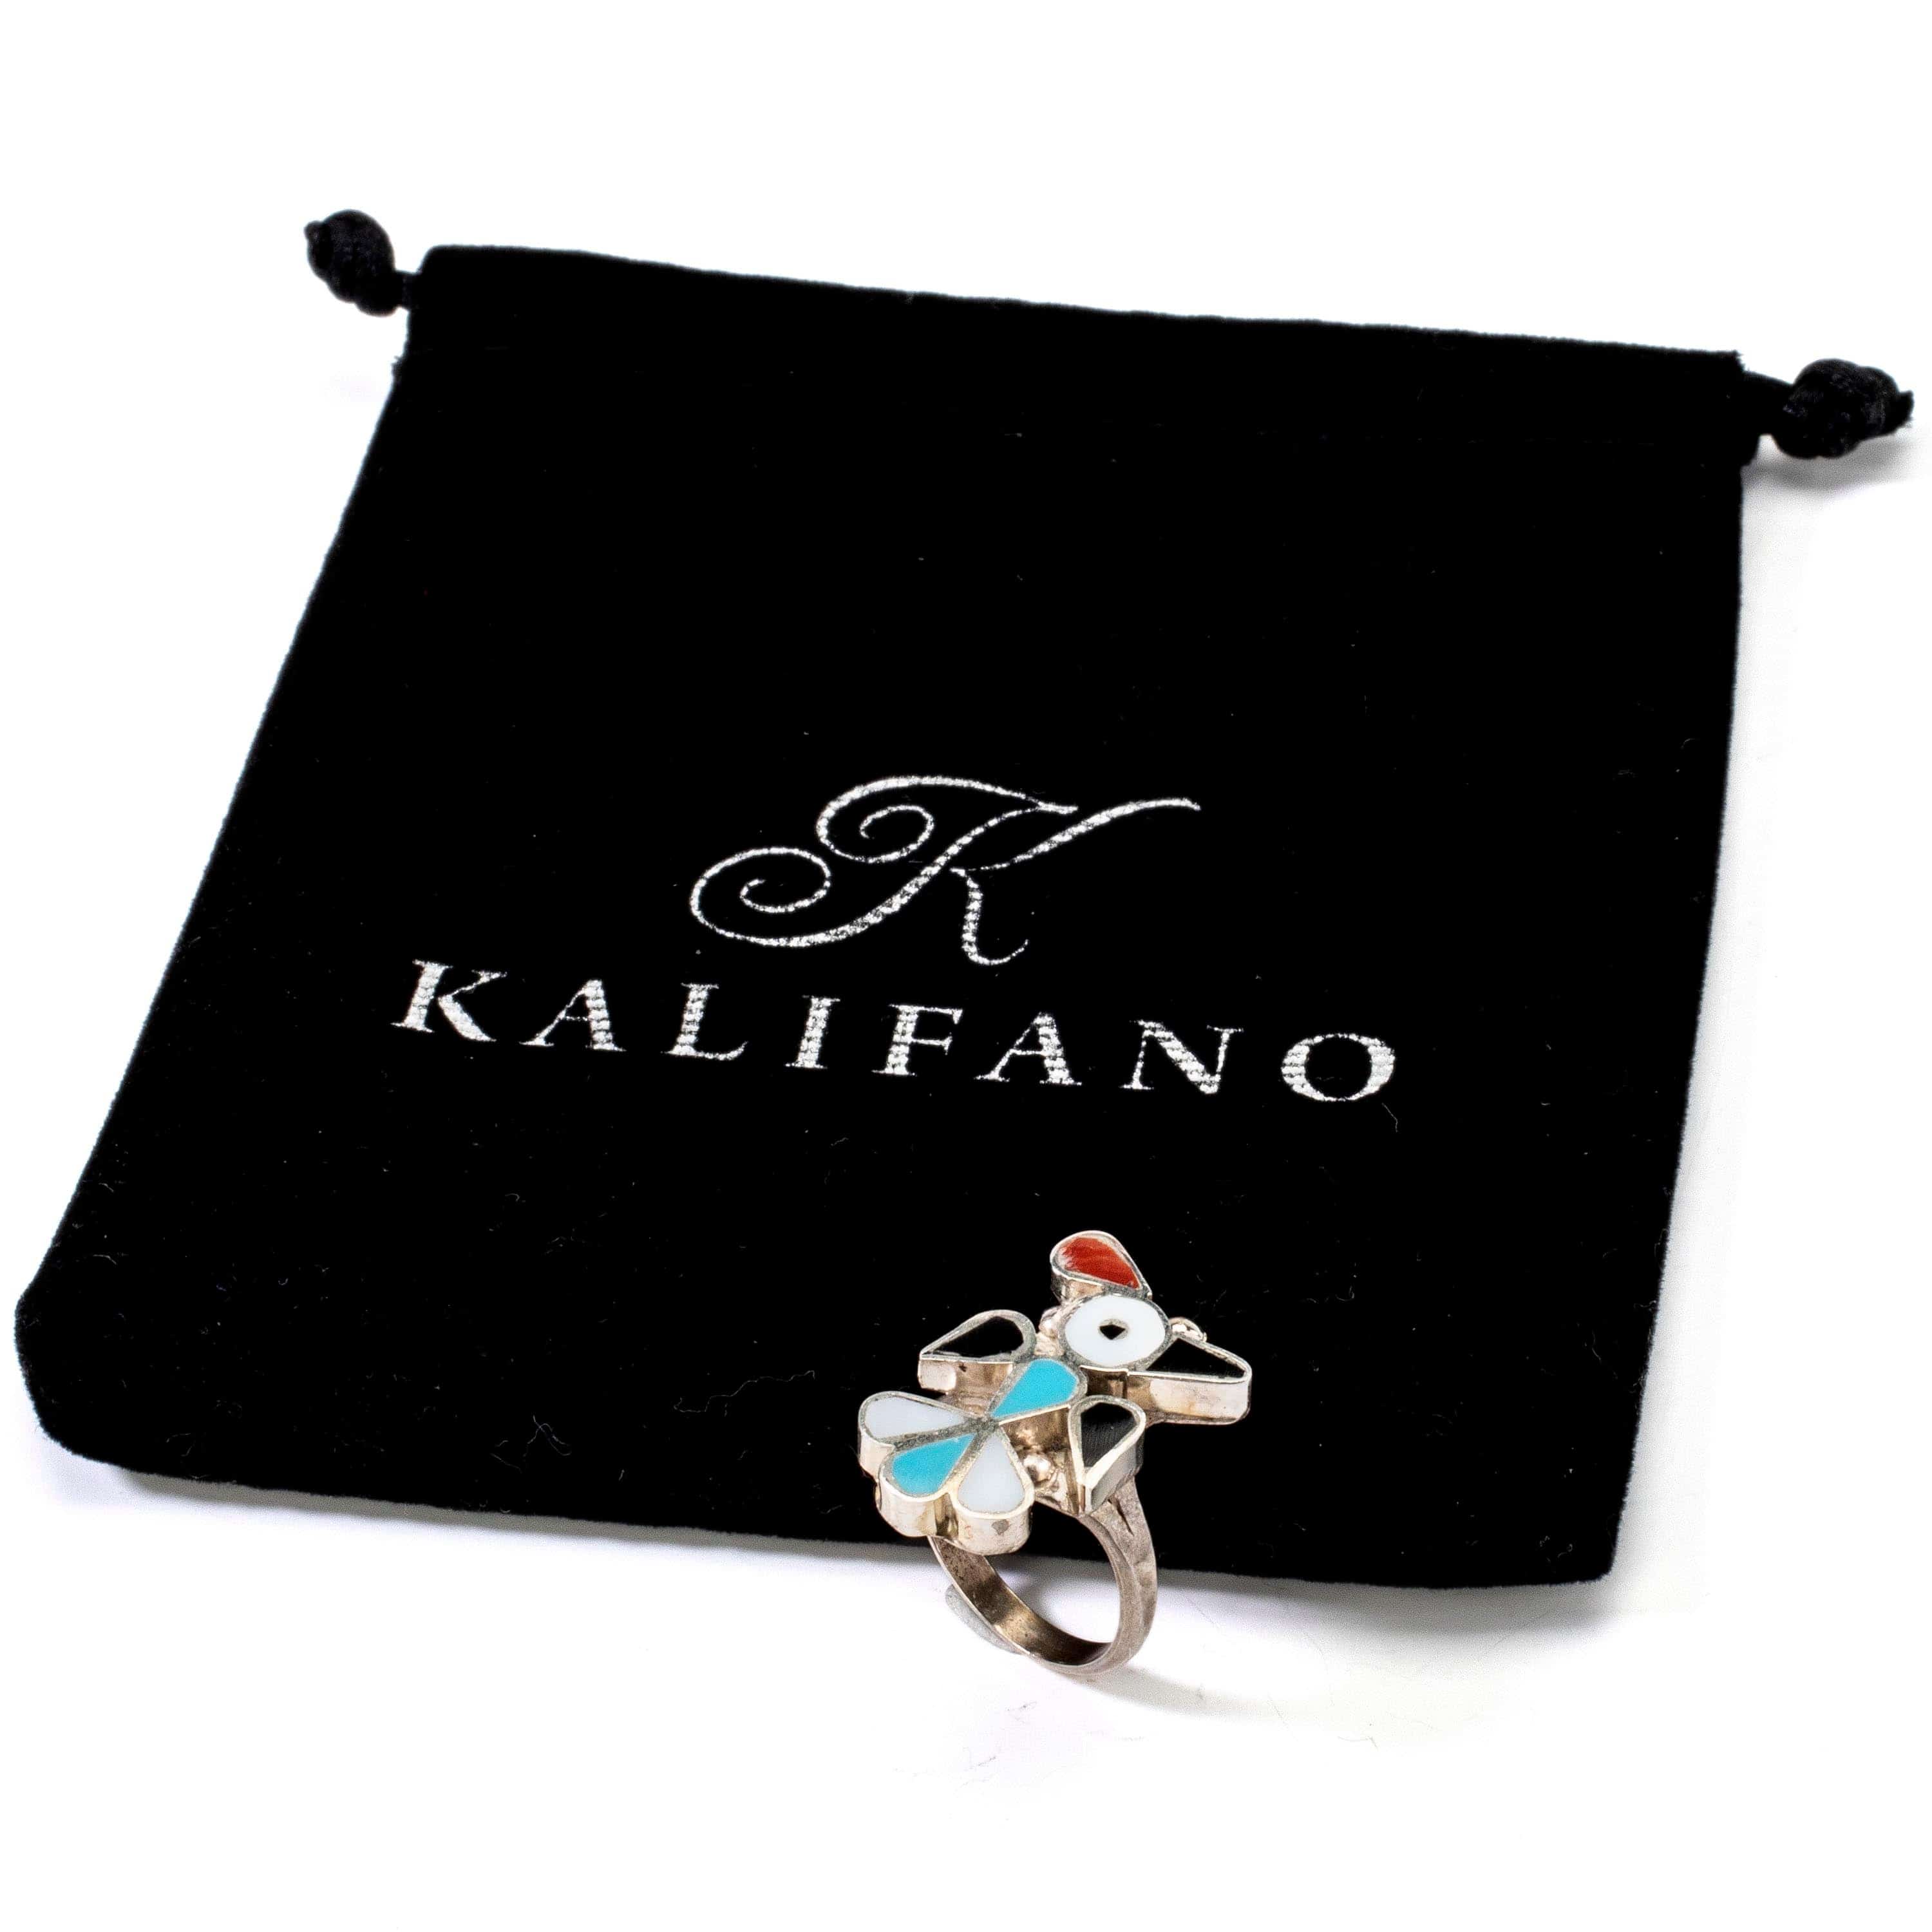 Kalifano Native American Jewelry 6 Pino Yunie Zuni Peyote Bird with Mother of Pearl, Black Onyx, Turquoise, and Coral USA Native American Made 925 Sterling Silver Ring NAR200.018.6